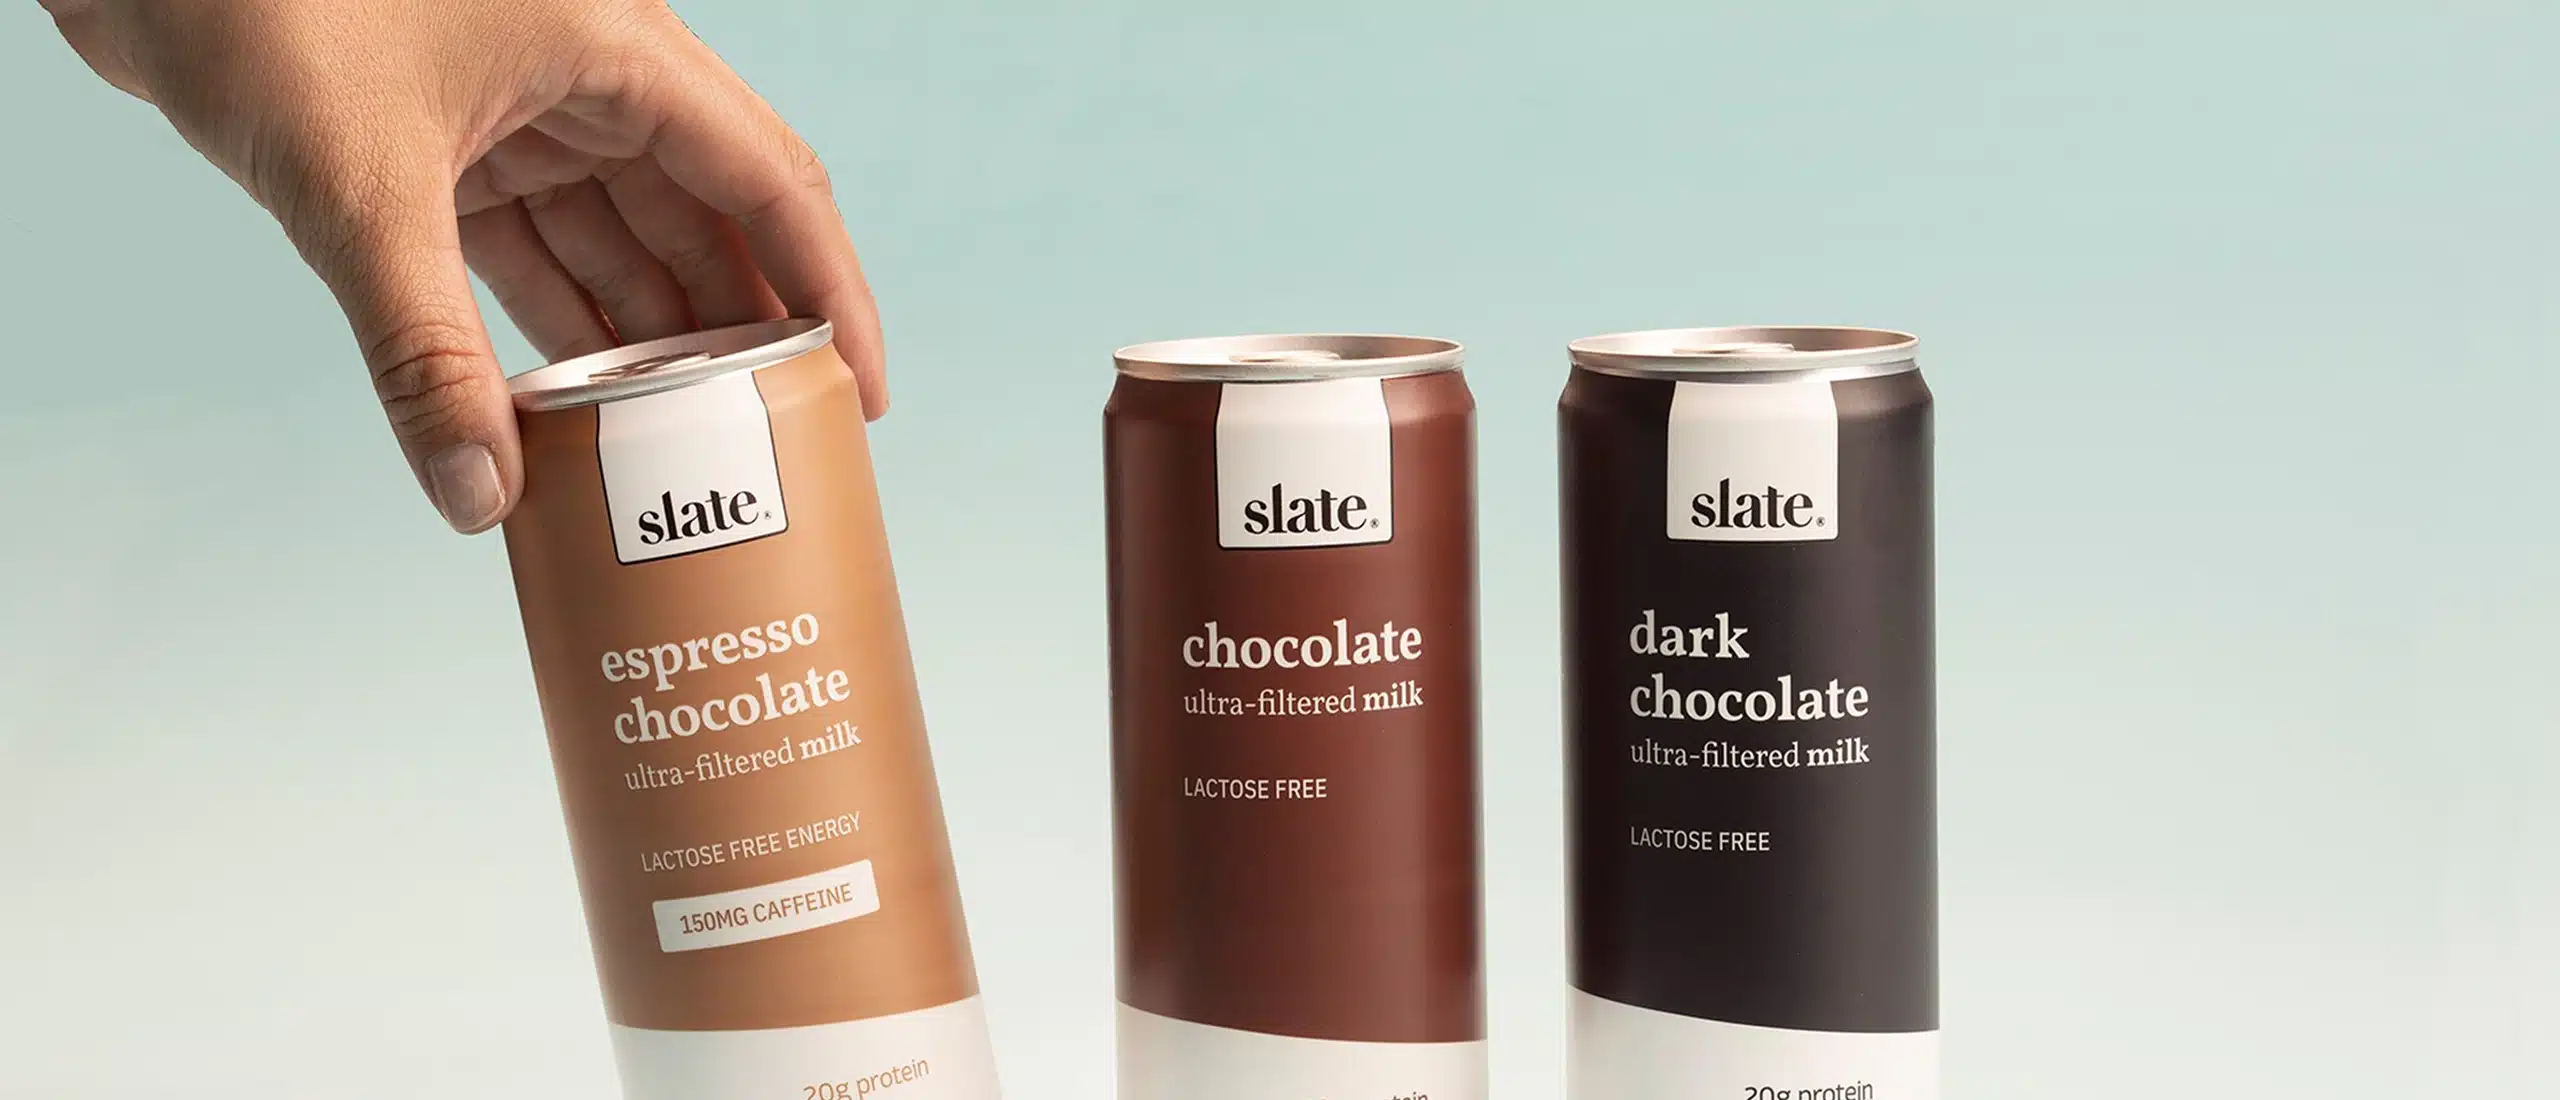 Slate Milk Review : Chocolate Milk for Fit Adults